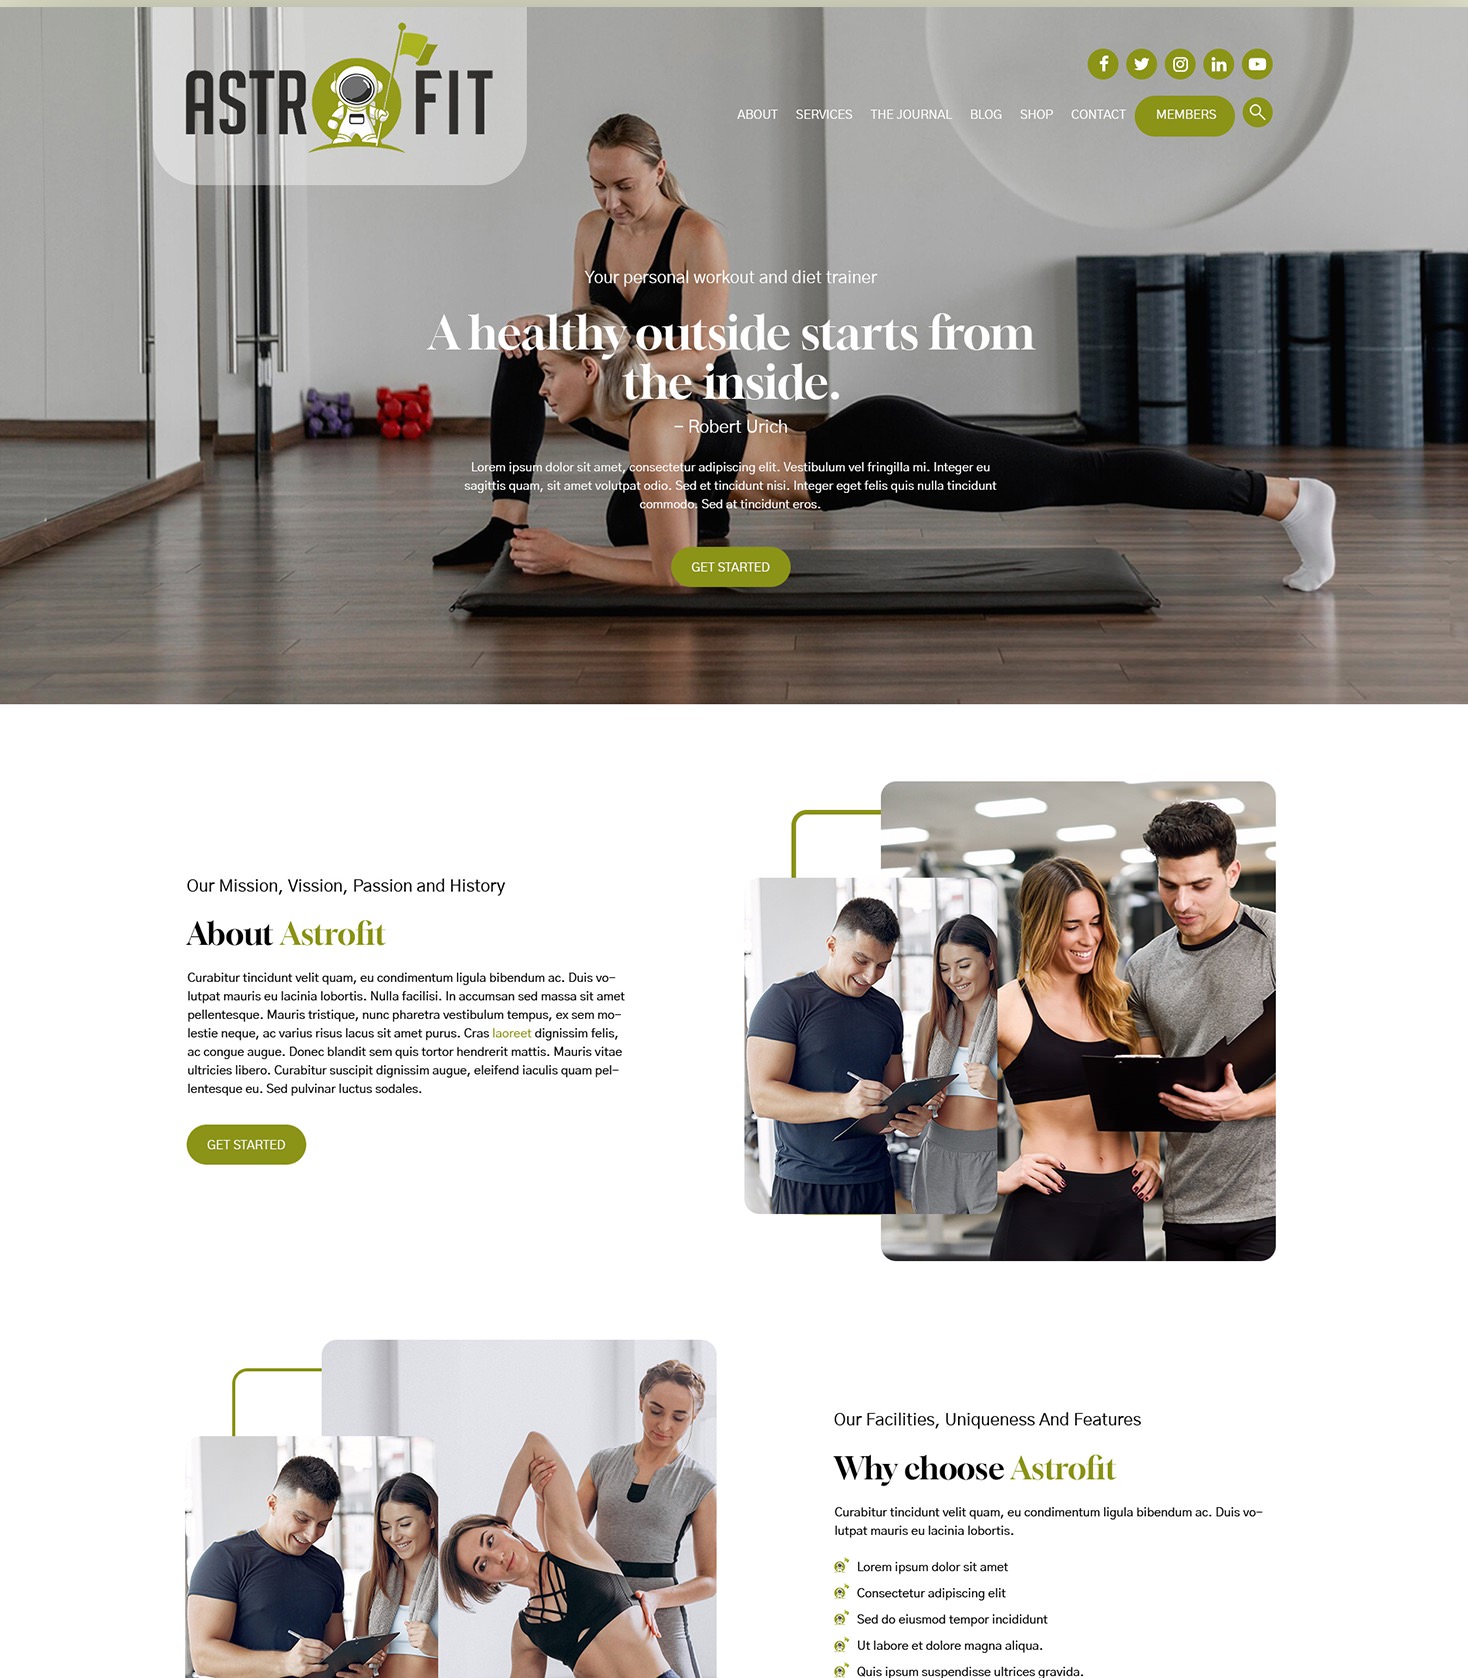 Personal Trainer website example